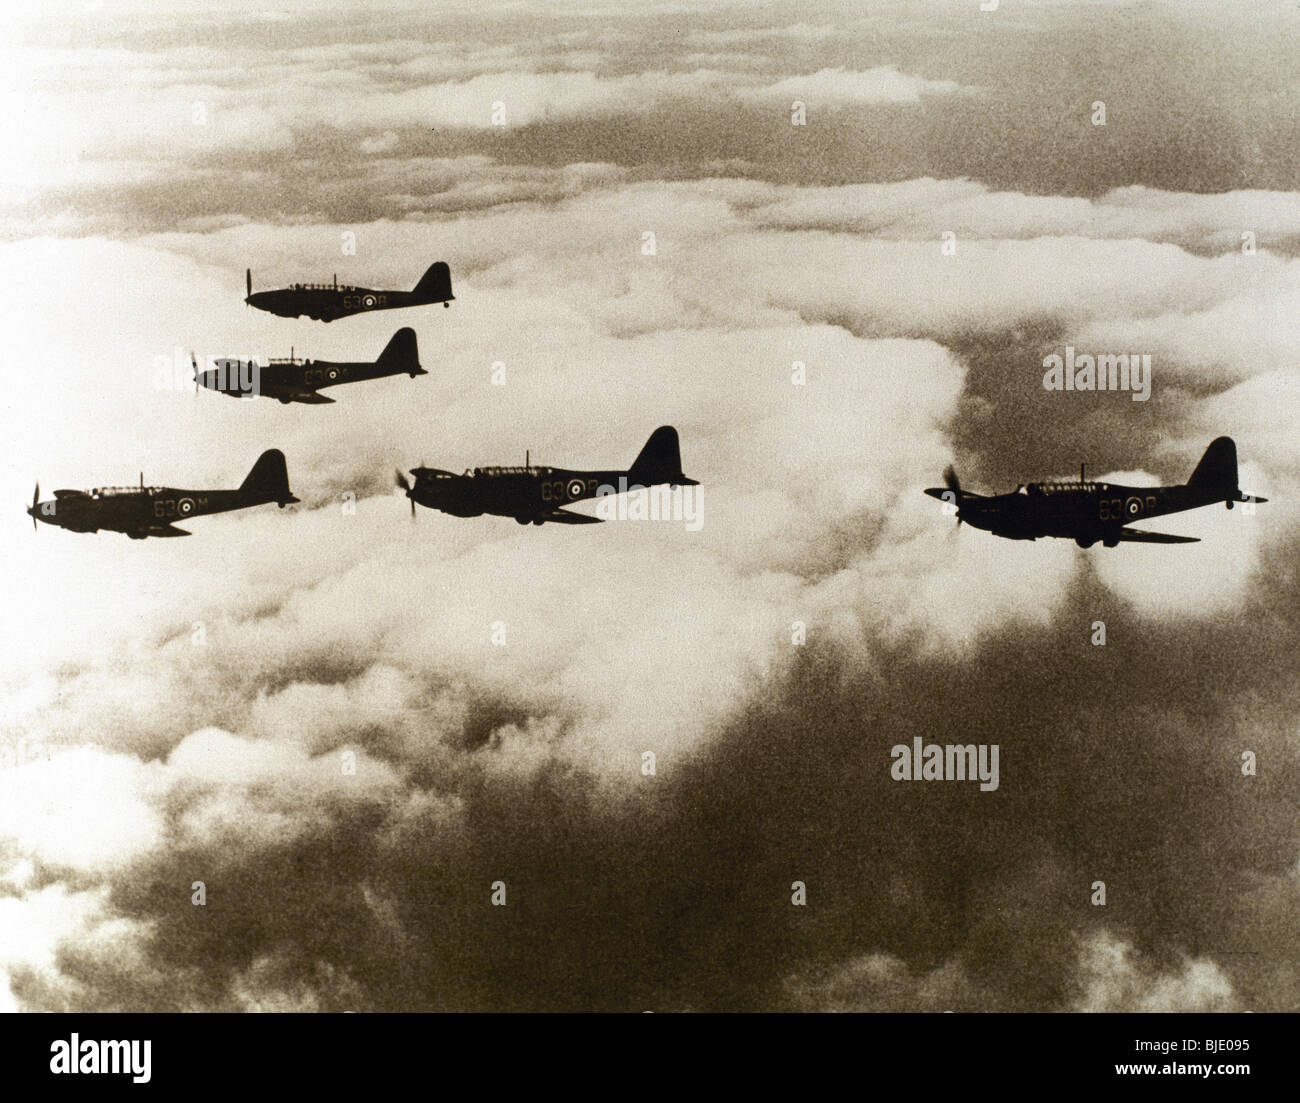 WORLD WAR II (1939-1945). A squad of British aircraft model 'SPITFIRE' flying.(October 1939). Stock Photo